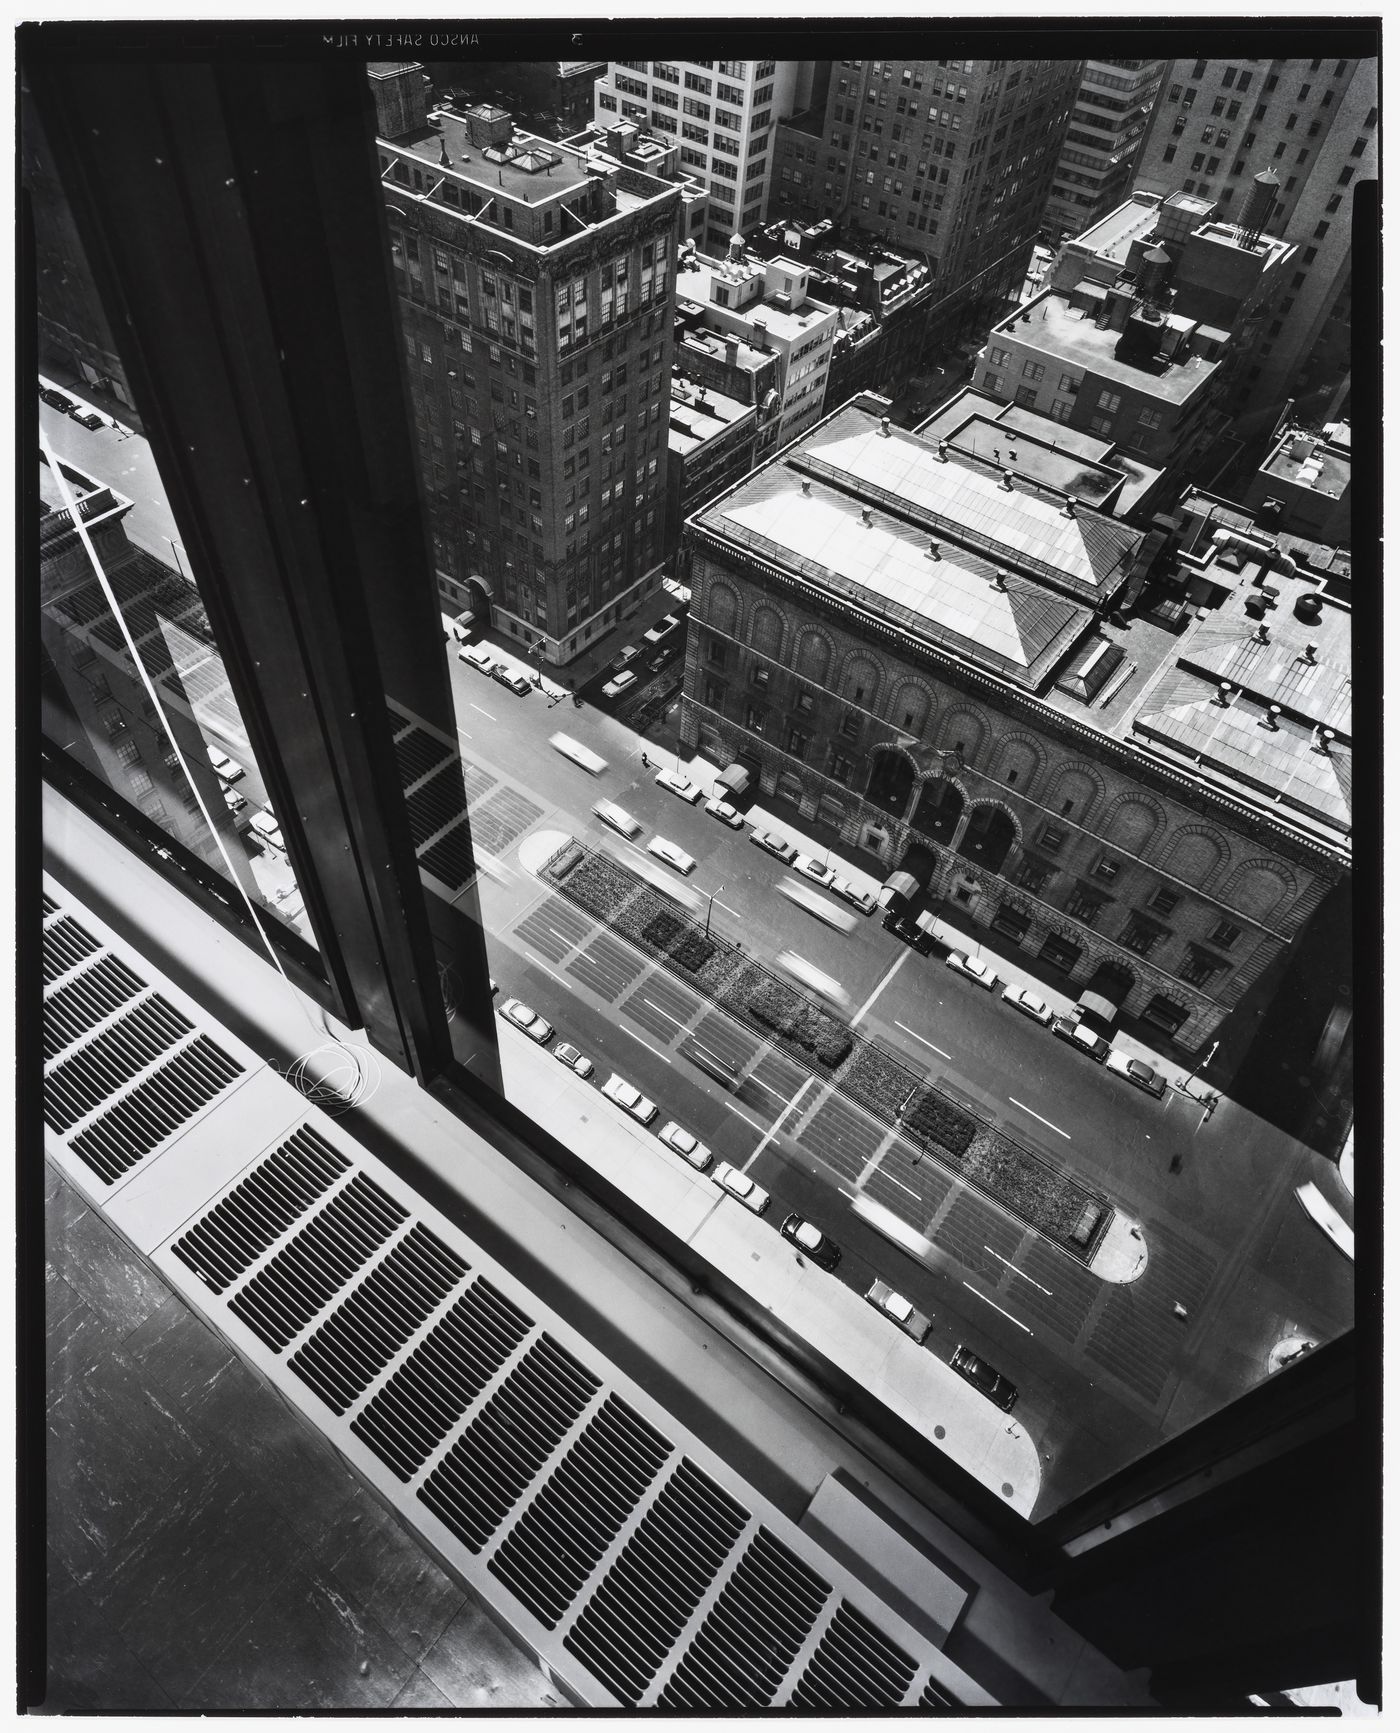 View from the top floor of the Seagram Building, New York City